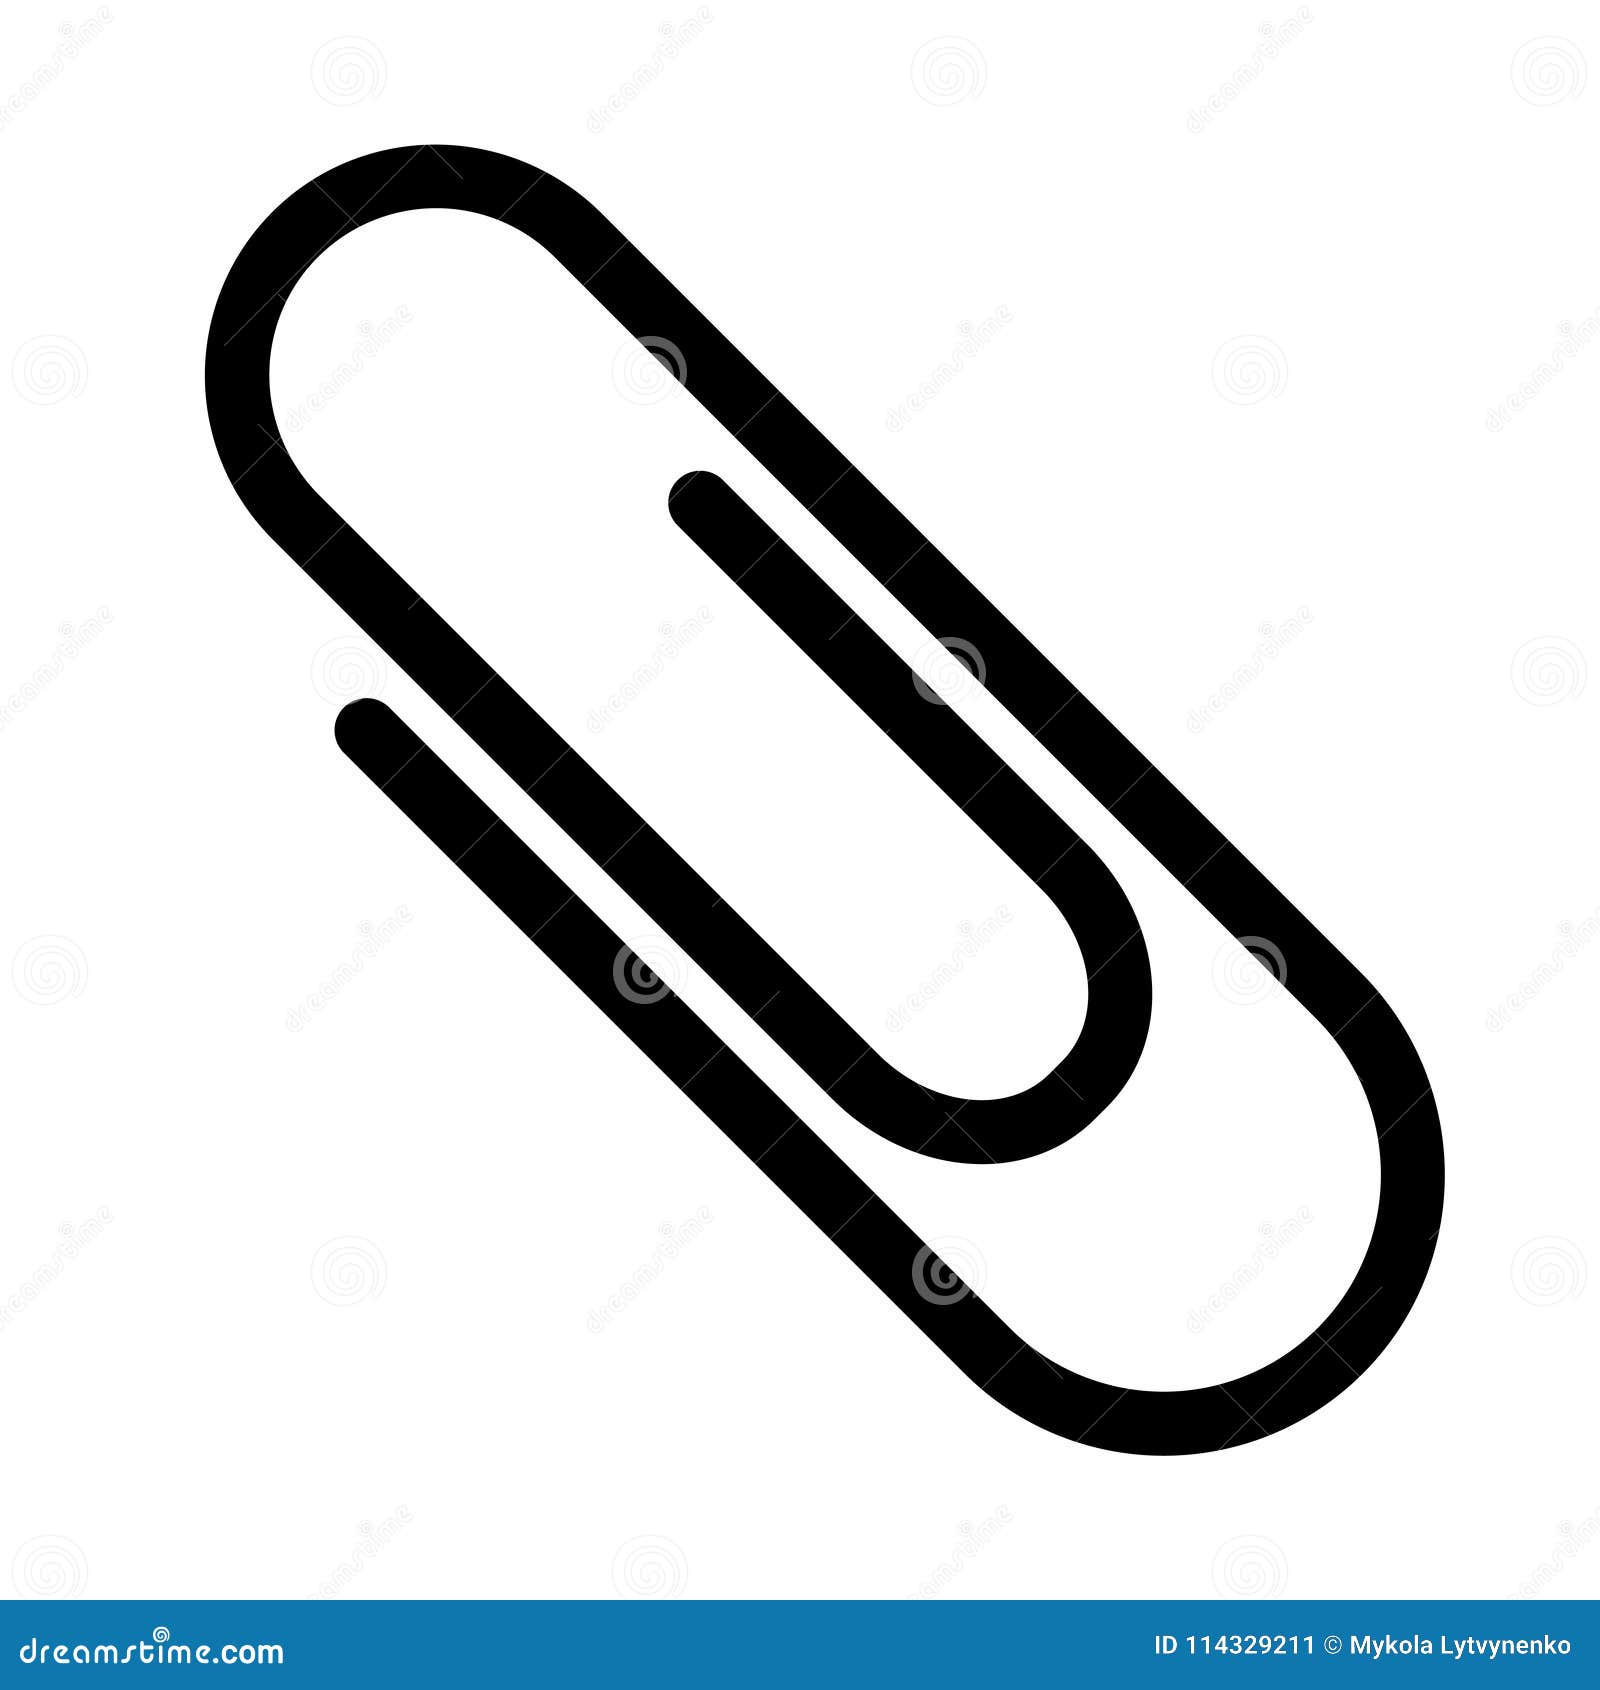 paper clip icon, diagonal position, email attachments,  logo paper clip for stationery